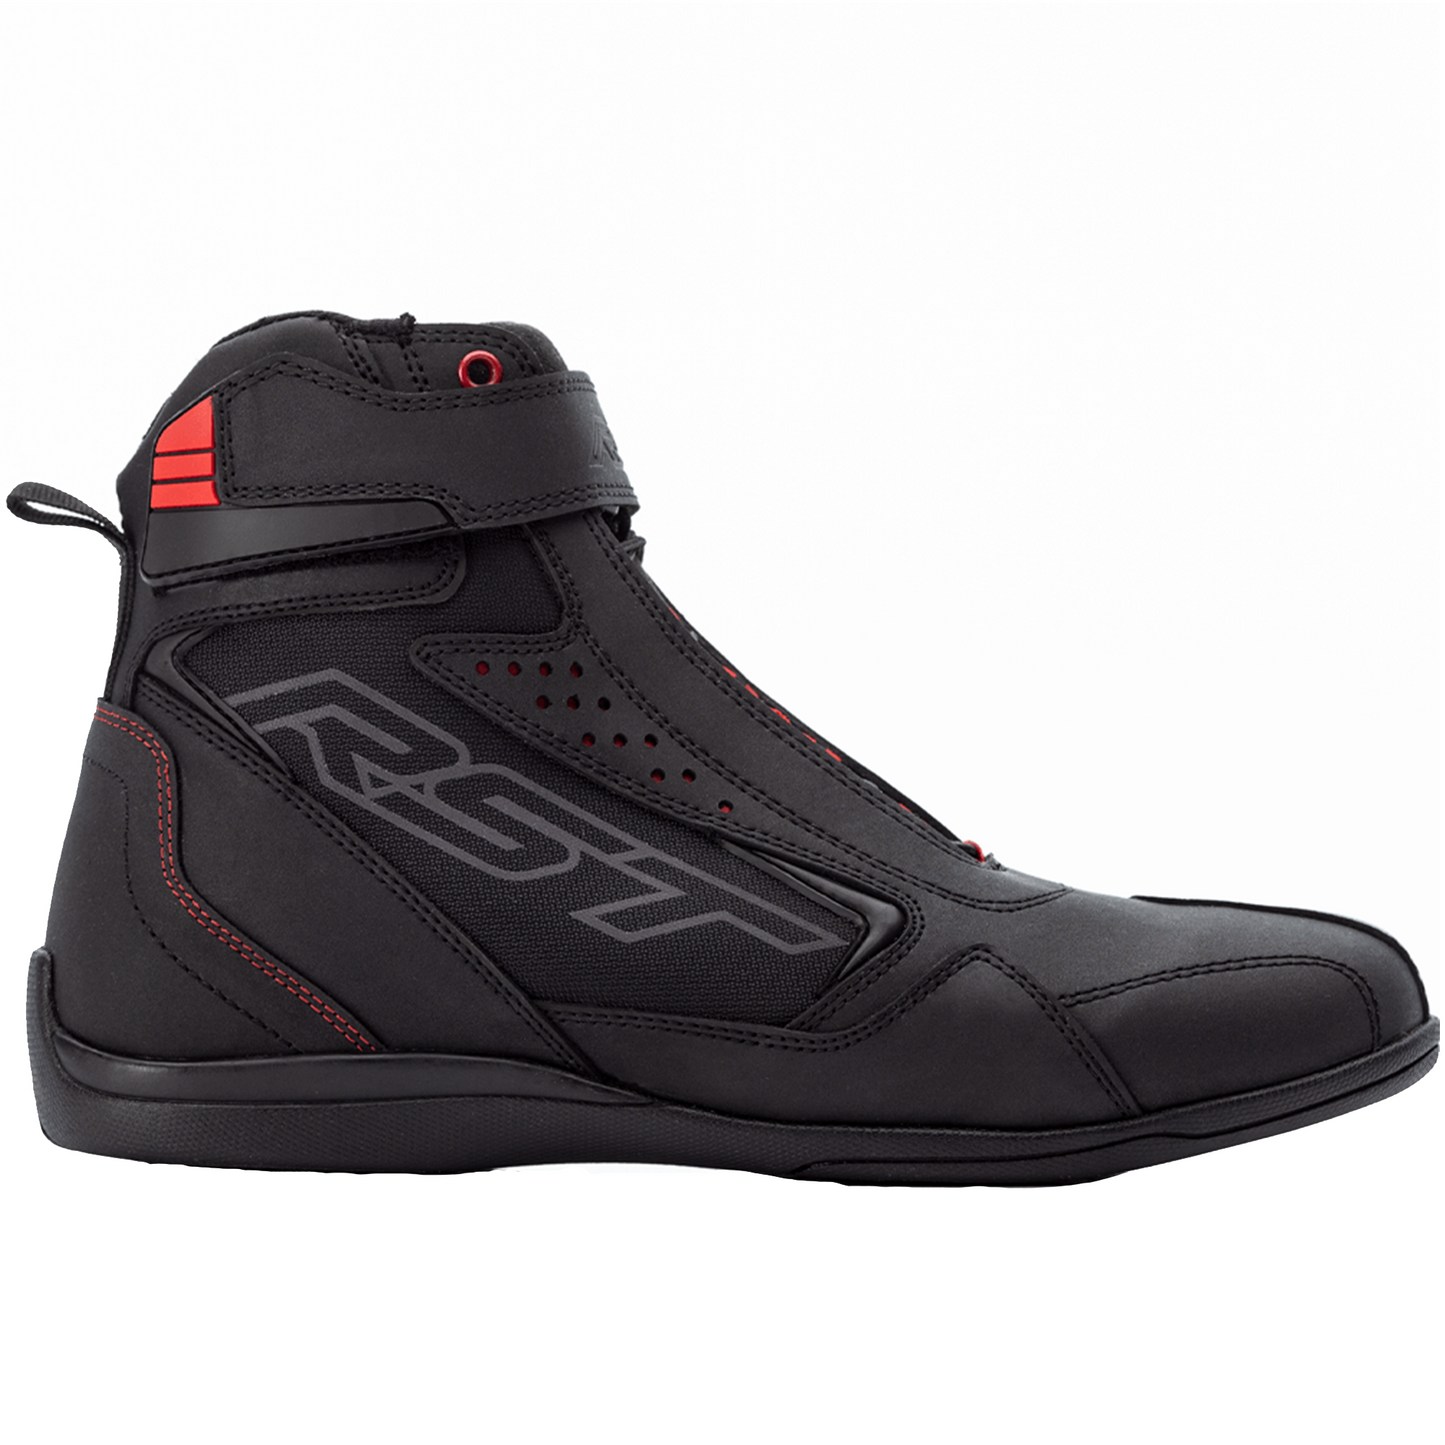 RST Frontier (CE) Boots (2746)